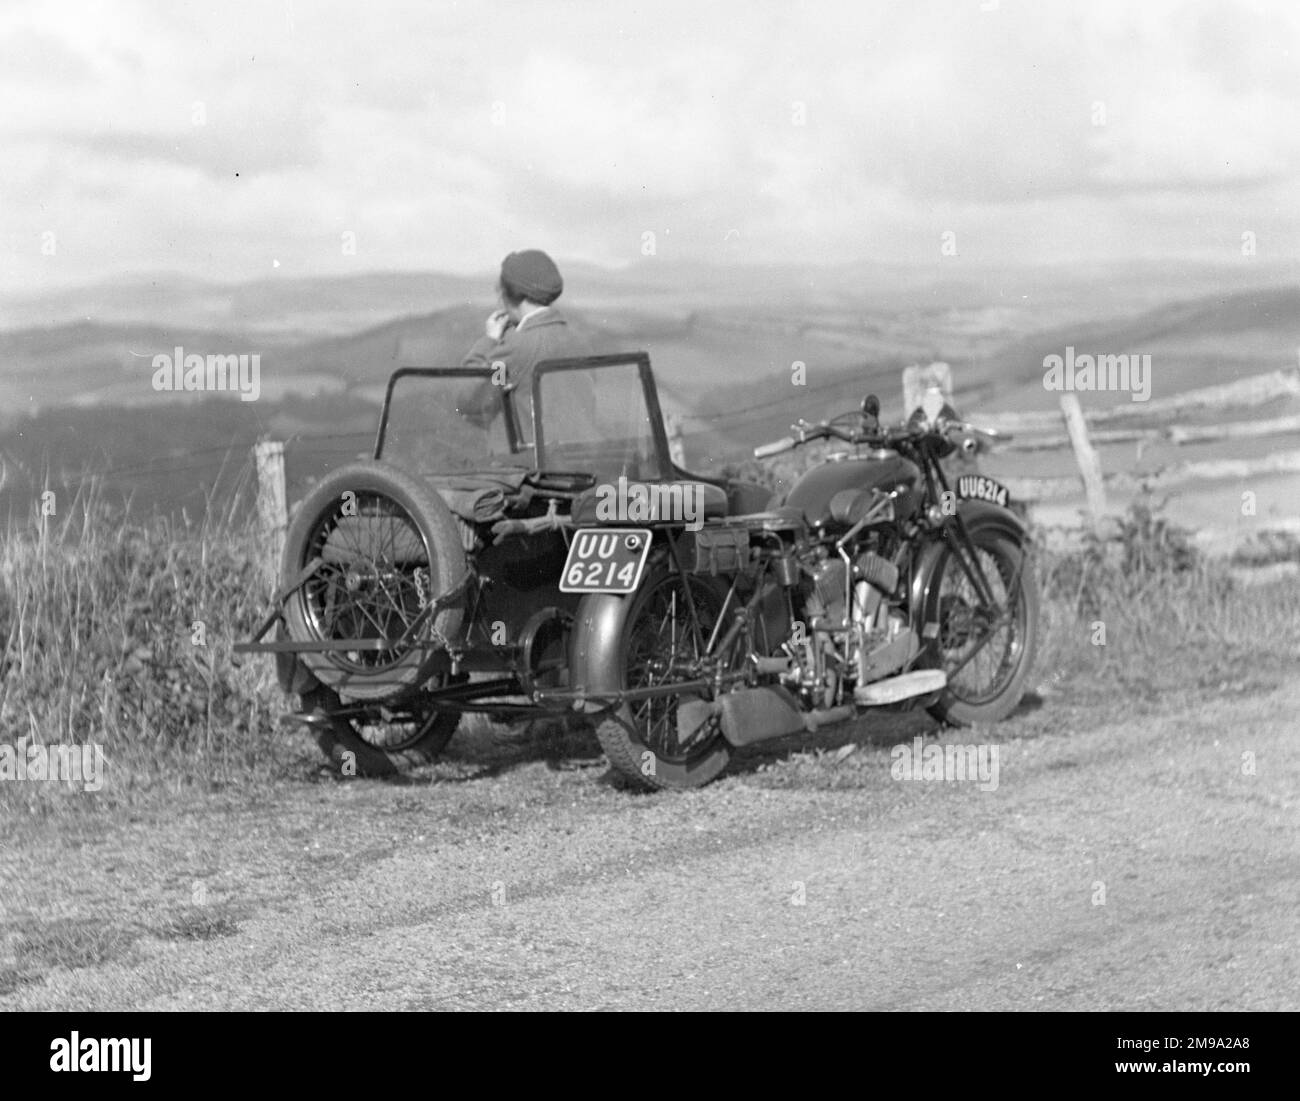 A.J.S. Motorcycles M1 (de-luxe) or  M2 (standard) 996cc V-twin with sidecar, from 1929 (M series), somewhere in Wales enjoying the view. In 1929 the M1 and M2 sold for sold for lb76.10s.0d. and lb66 respectively. See: http://www.historywebsite.co.uk/Museum/Transport/Motorcycles/ajs4f.htm Stock Photo